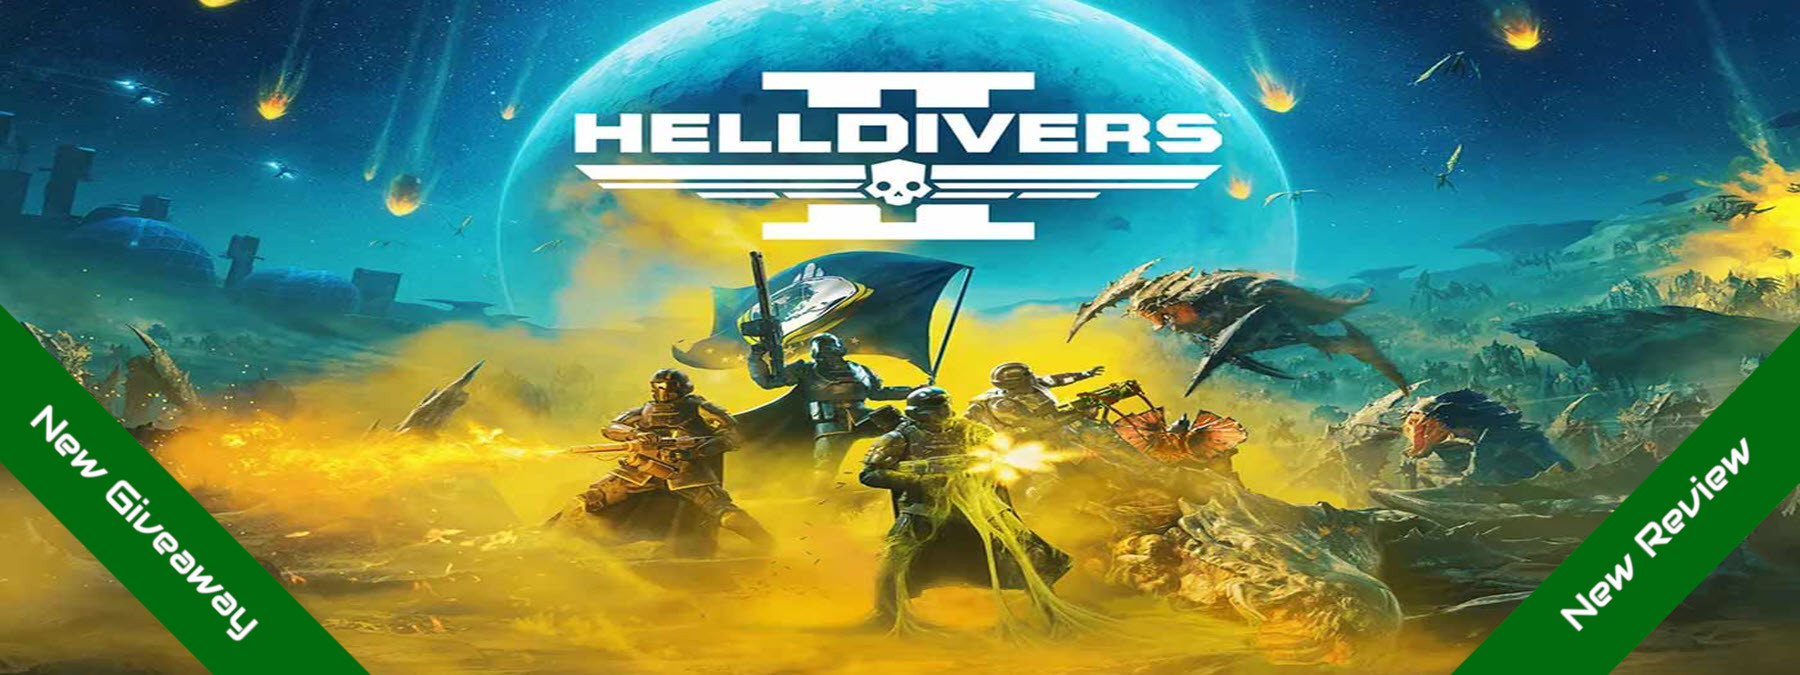 helldivers-carousel-1